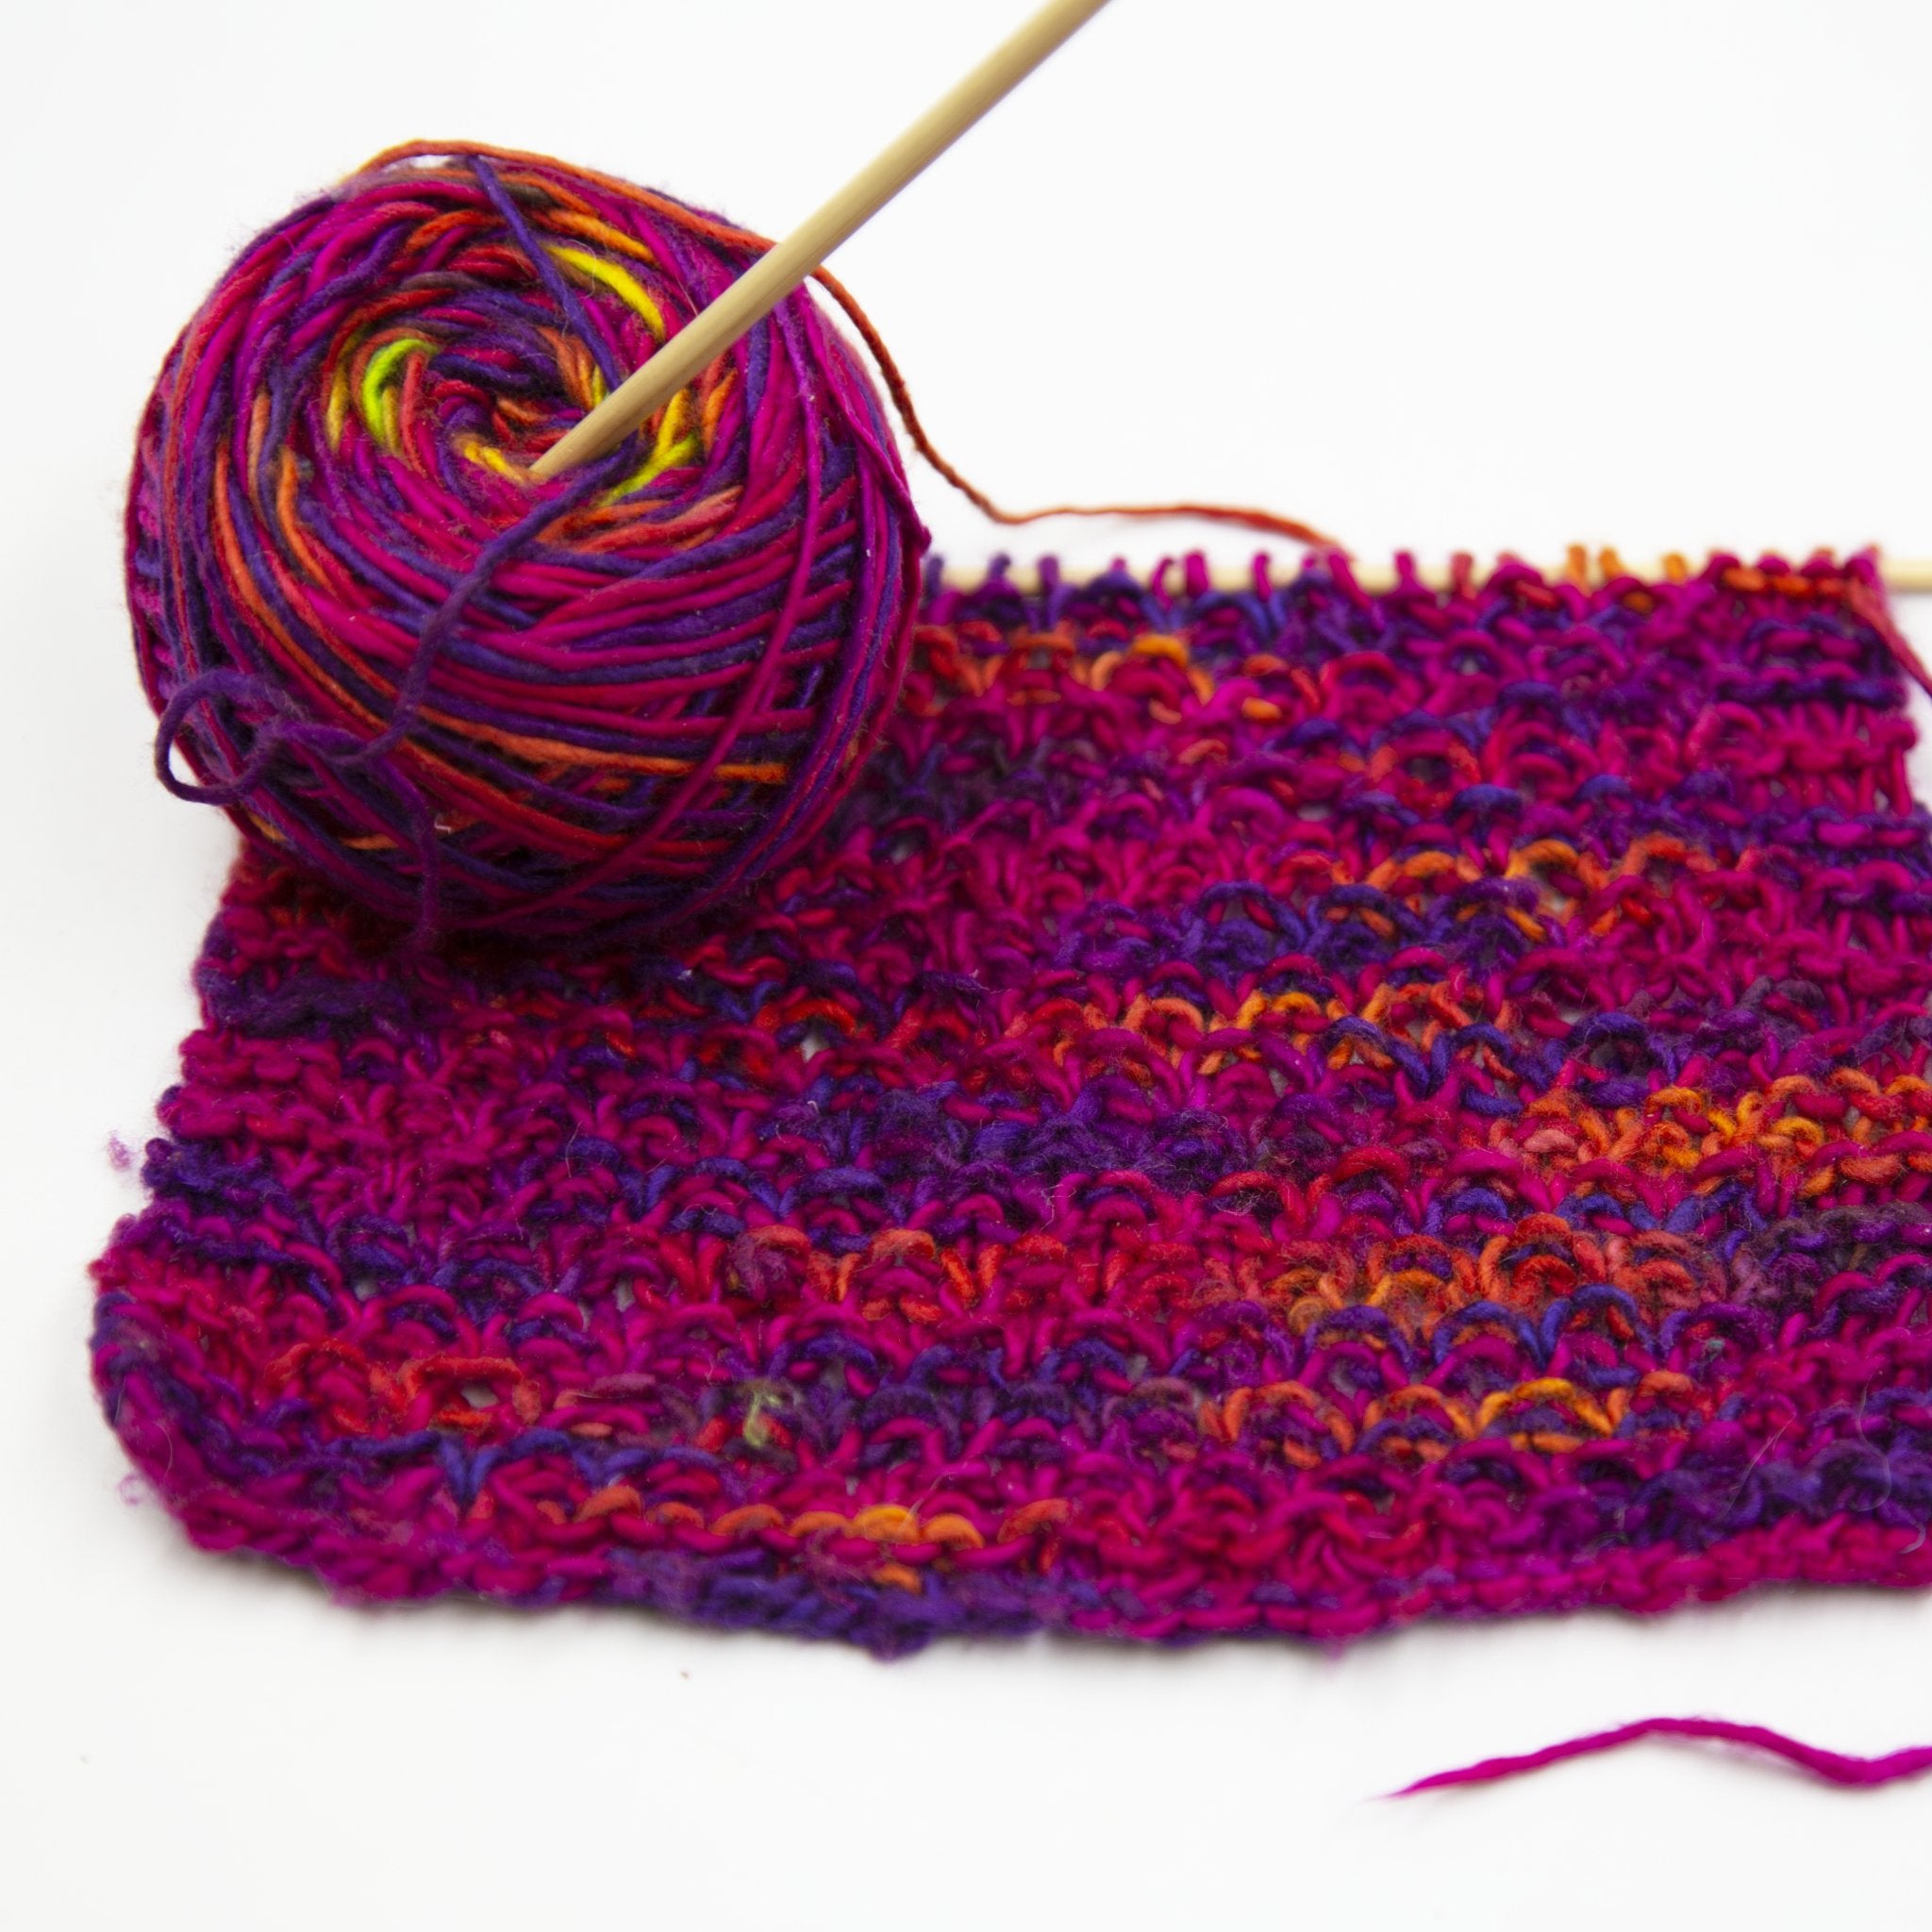 Knitting Stitches for Variegated Yarn –